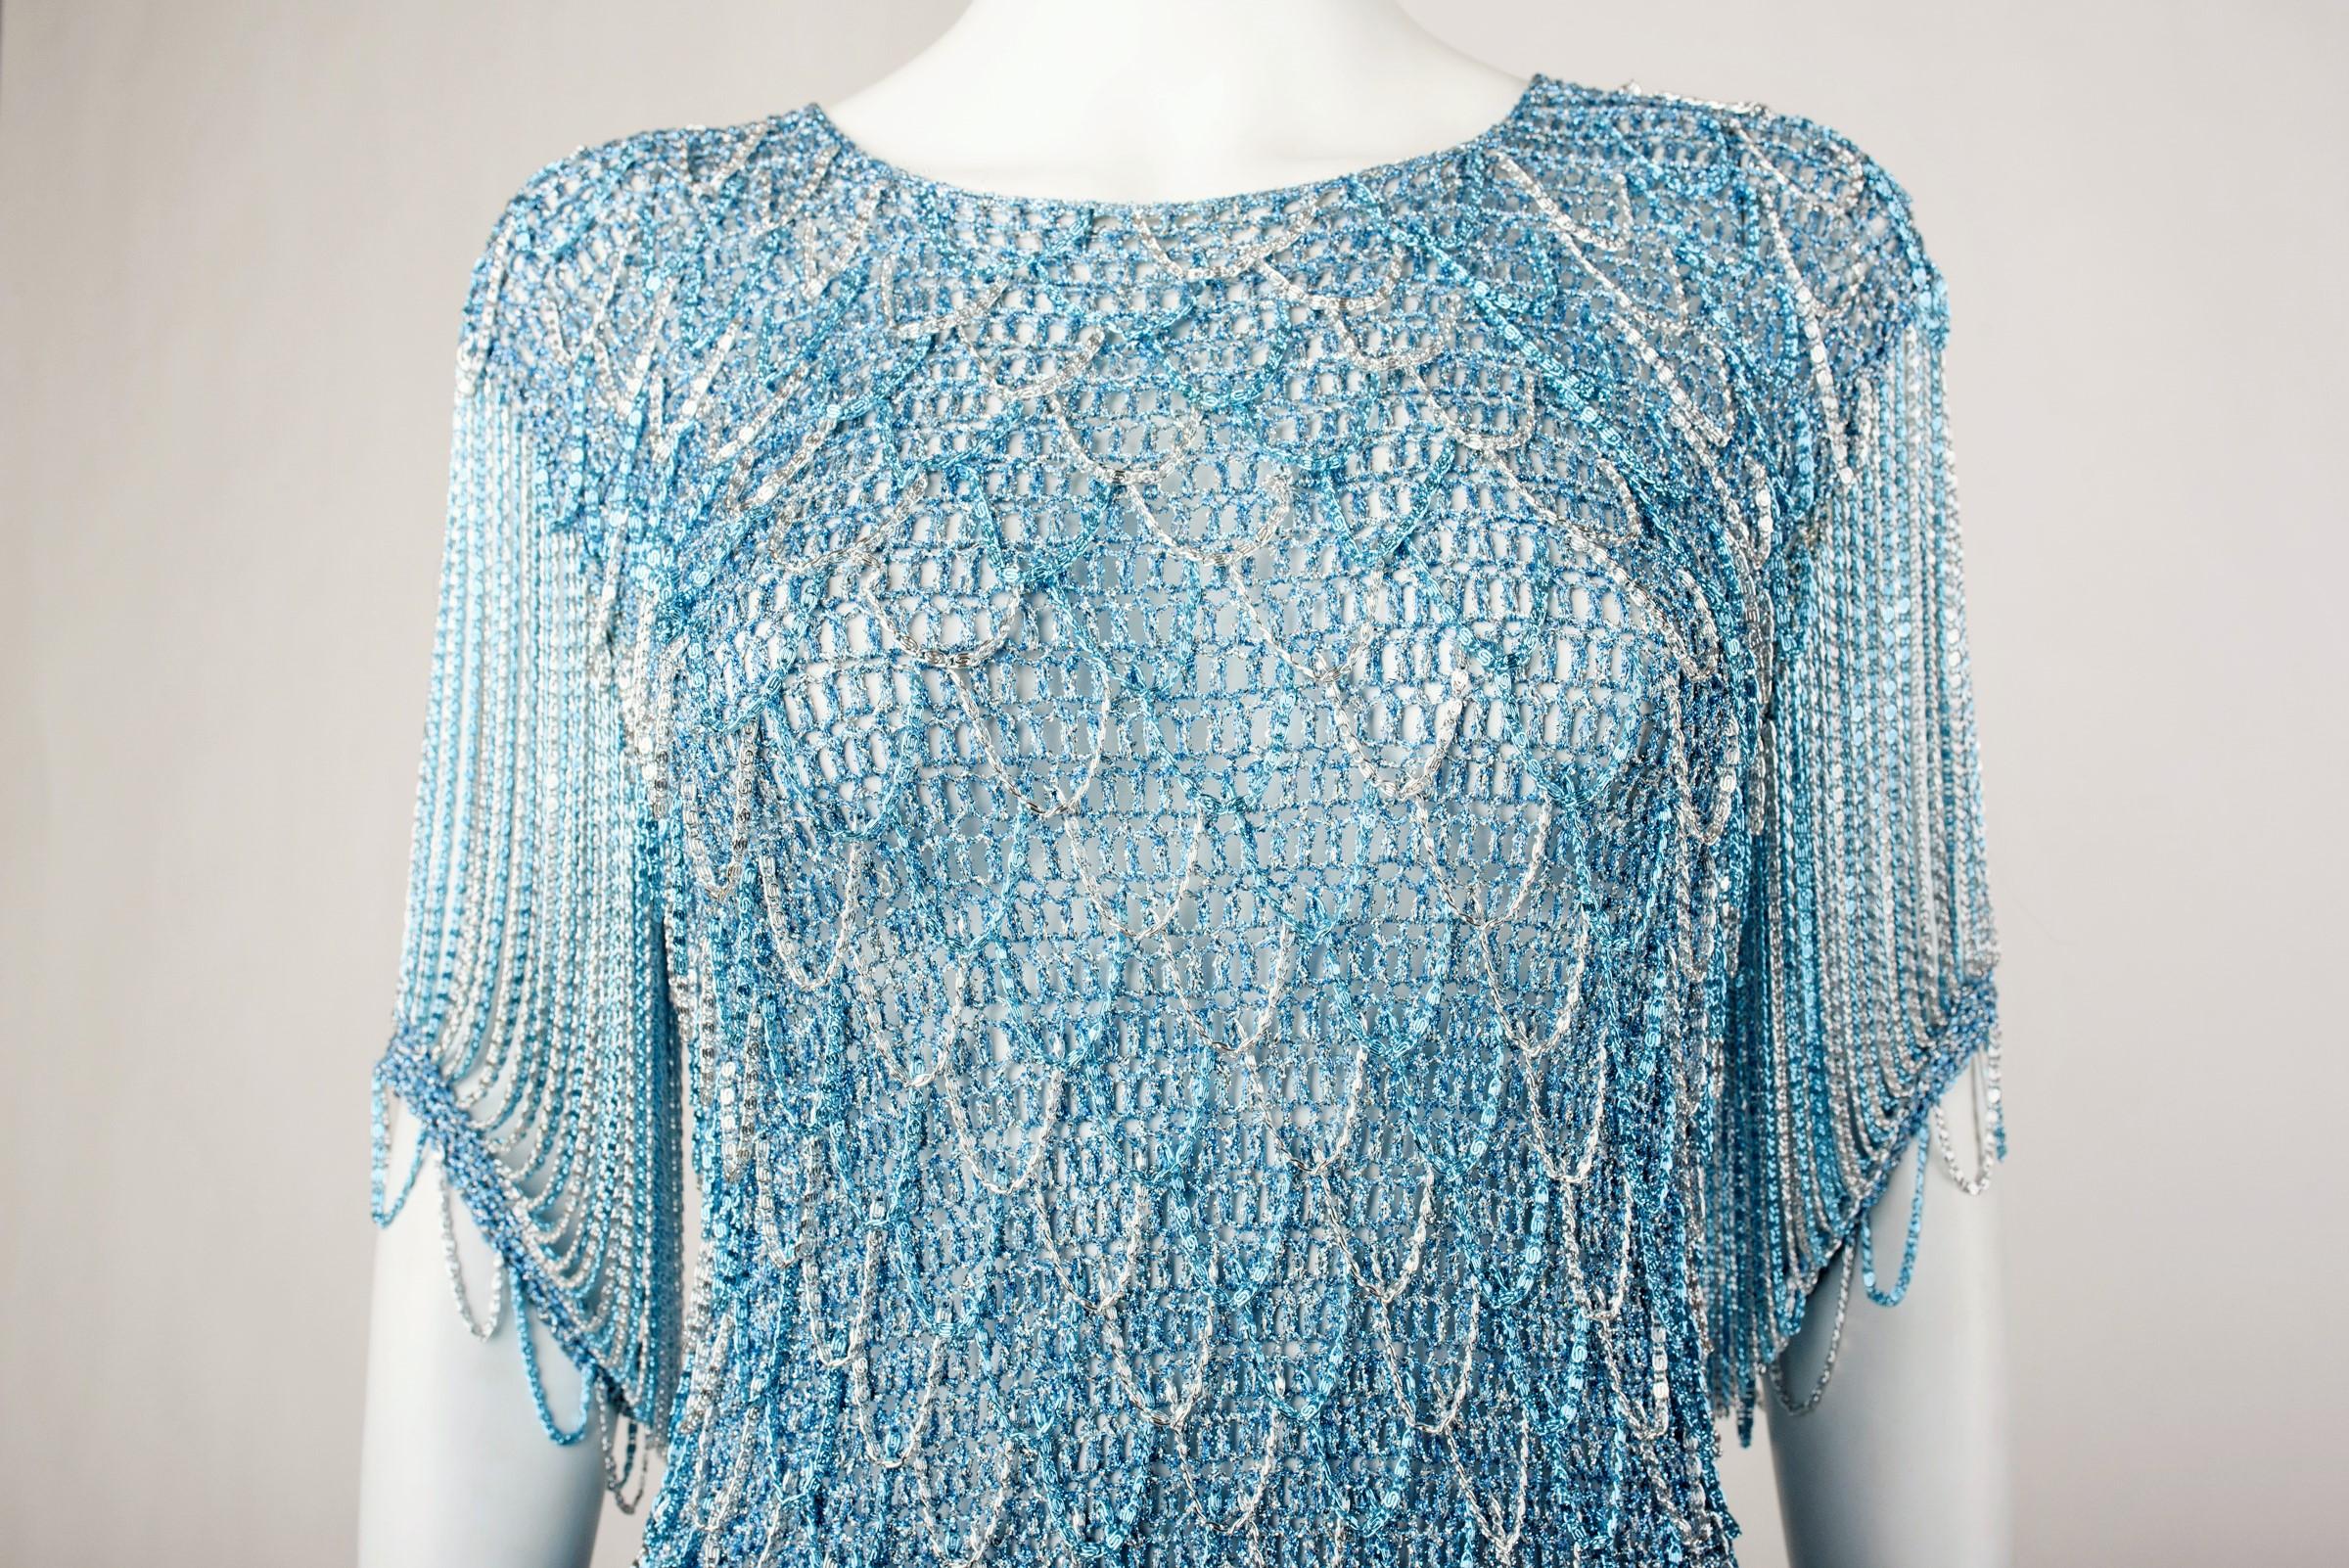 A Loris Azzaro Couture Top in Lurex and silver chains - French Circa 1970 For Sale 2